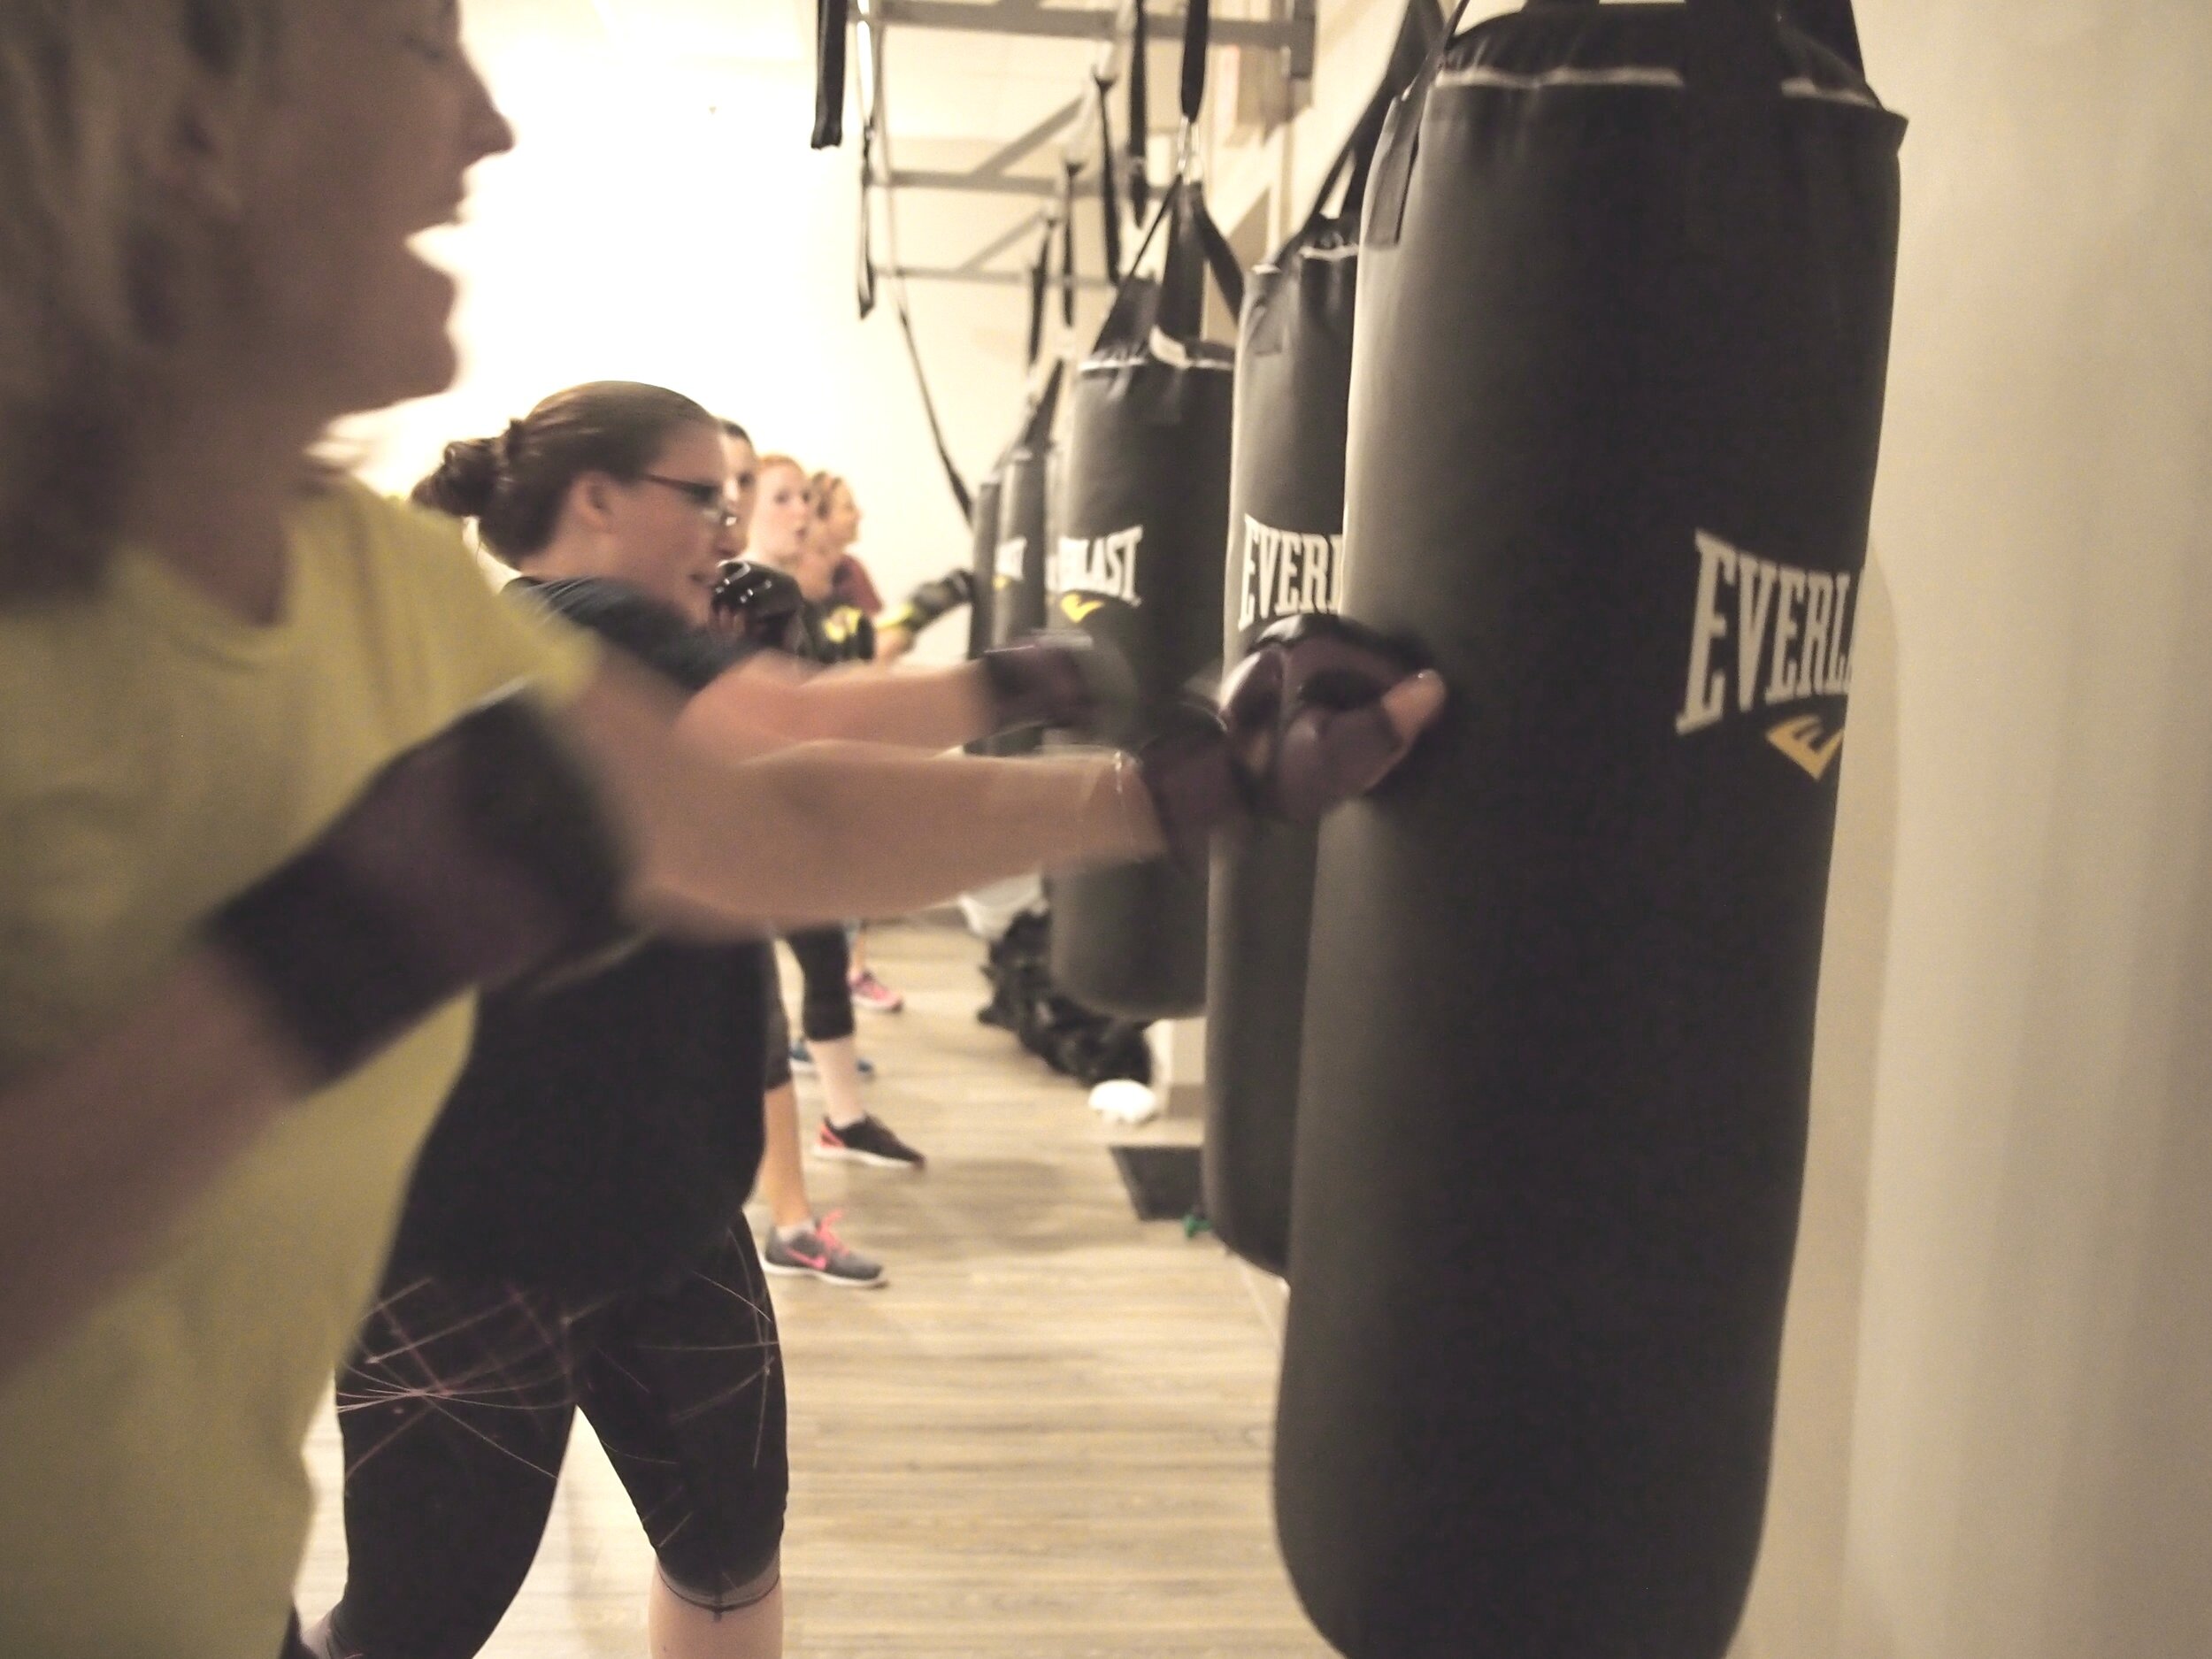 boxing near me, boxing instruction near me, private boxing lessons near me, kickboxing near me, community center, gym near me, group fitness classes, workout near me, spin near me, cycle near me